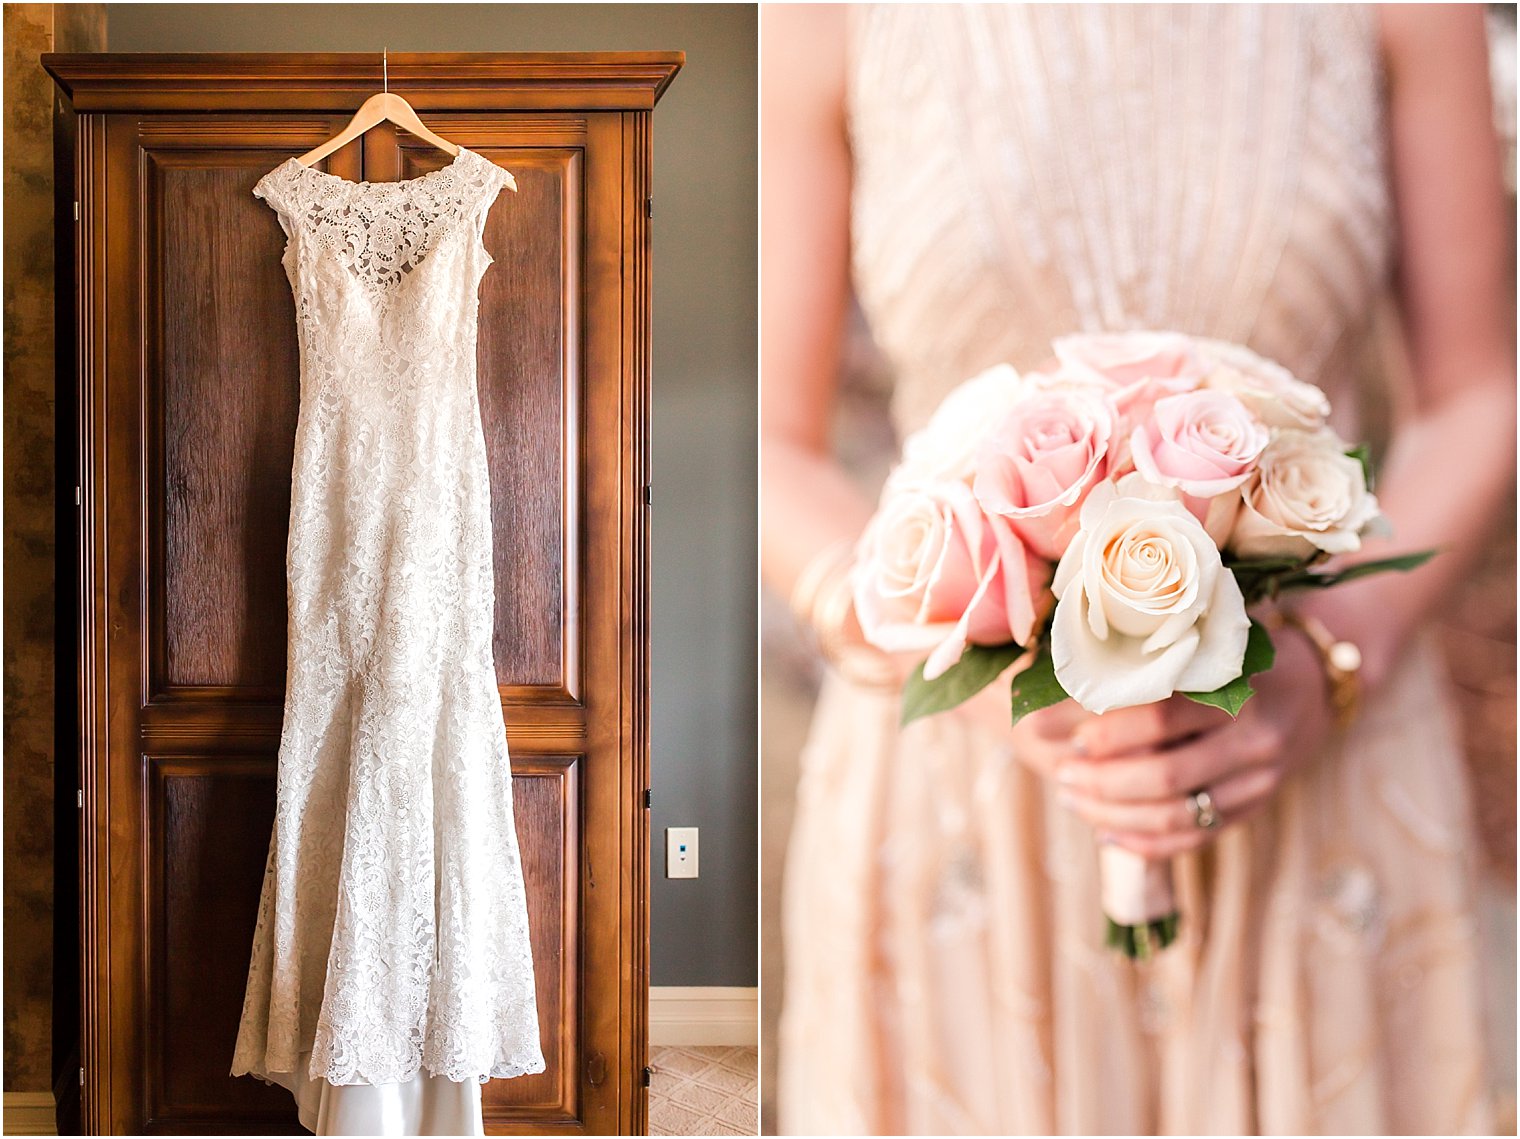 Wedding dress by Madison James, from Kleinfeld's | Florals by Floral Gallery